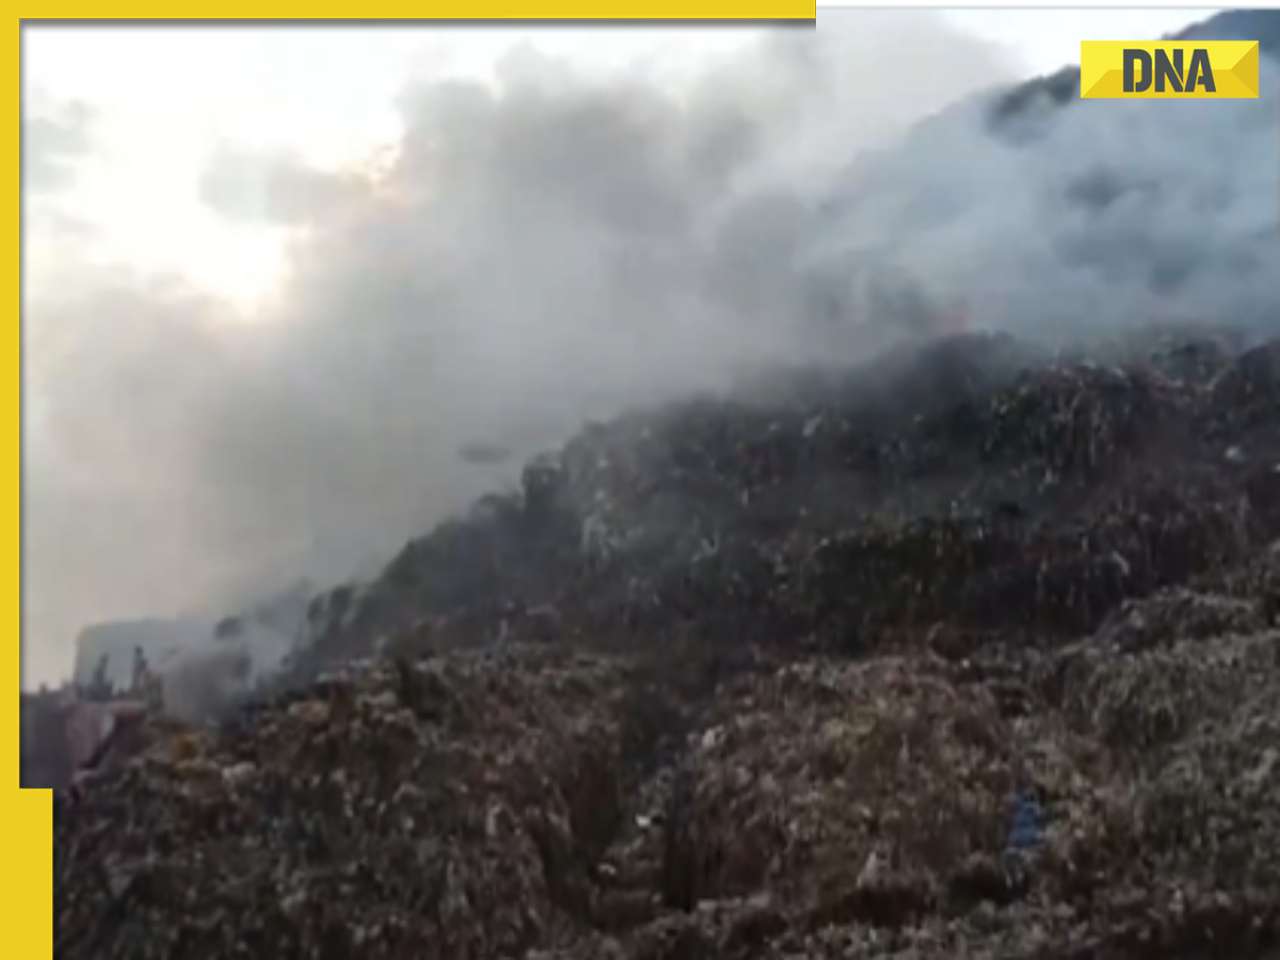 Ghazipur landfill fire: Locals grapple with breathing issues, eye and throat irritation; watch video